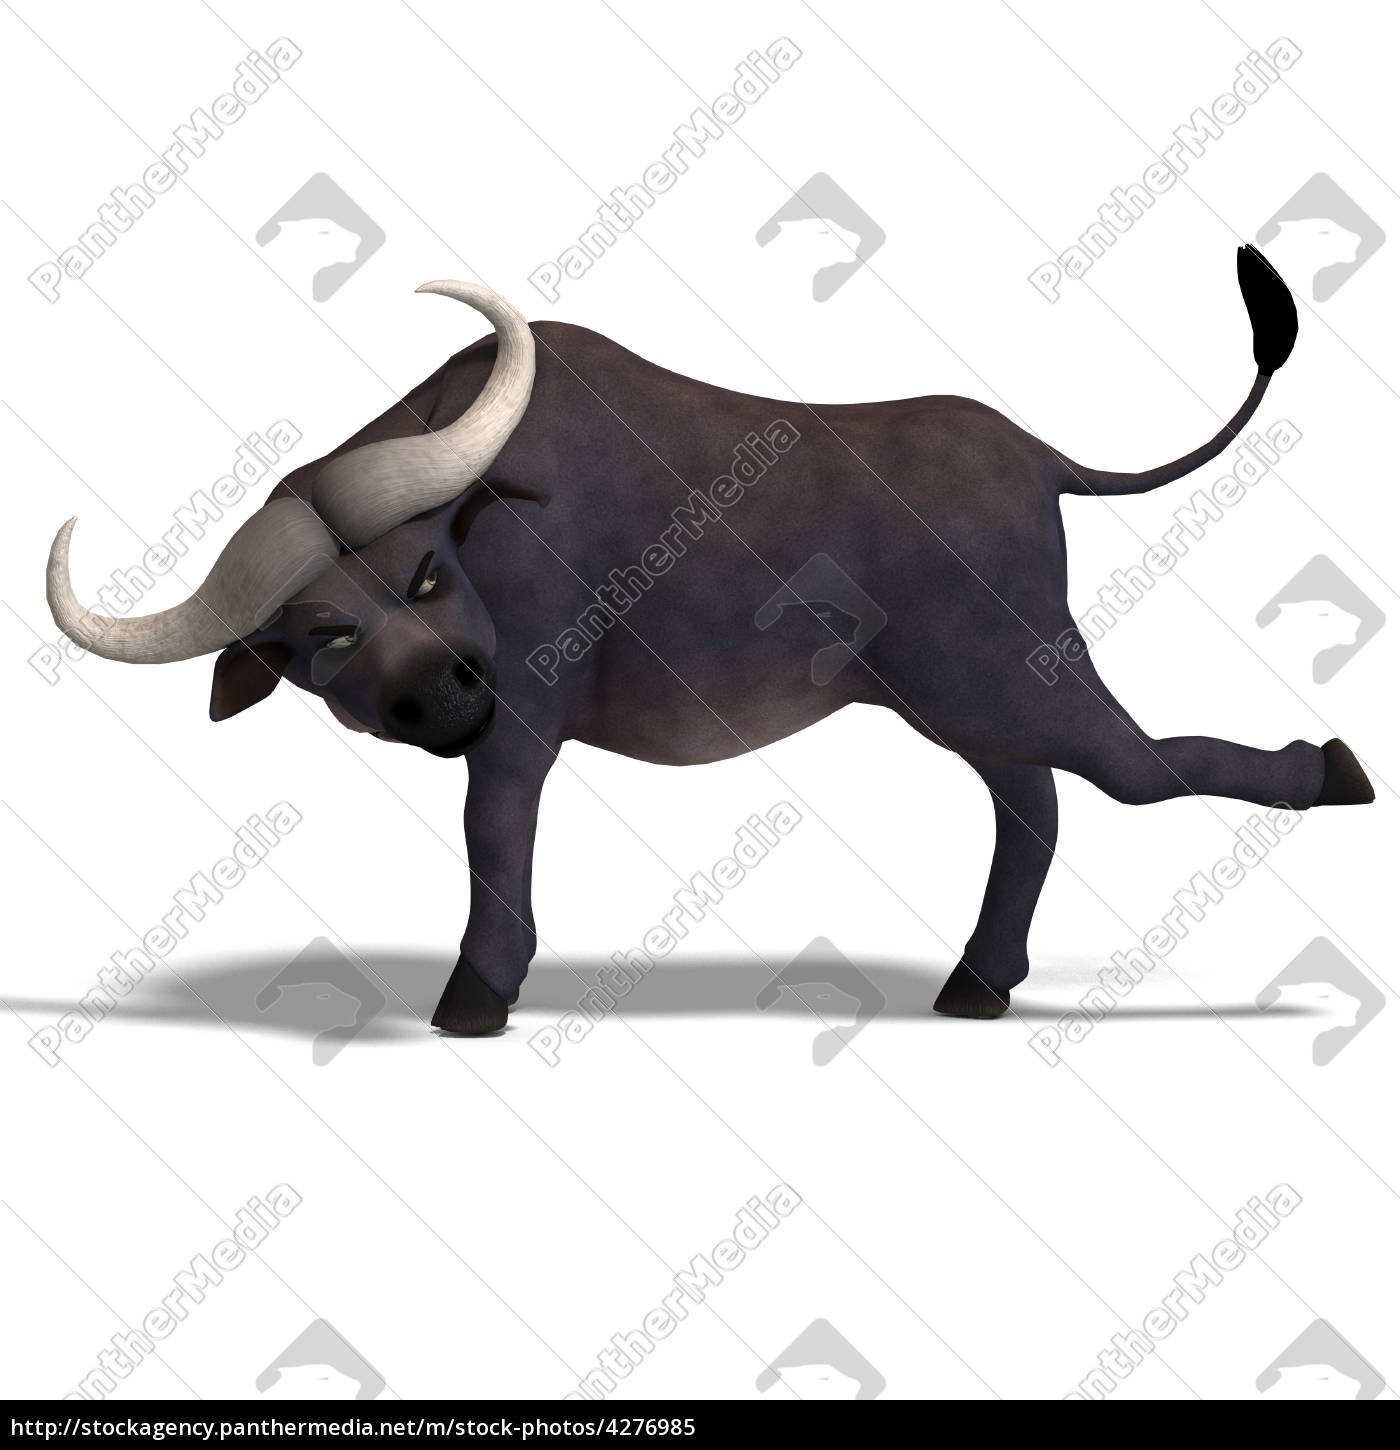 Efterligning forkæle faglært very cute and funny cartoon buffalo - Stock Photo - #4276985 | PantherMedia  Stock Agency